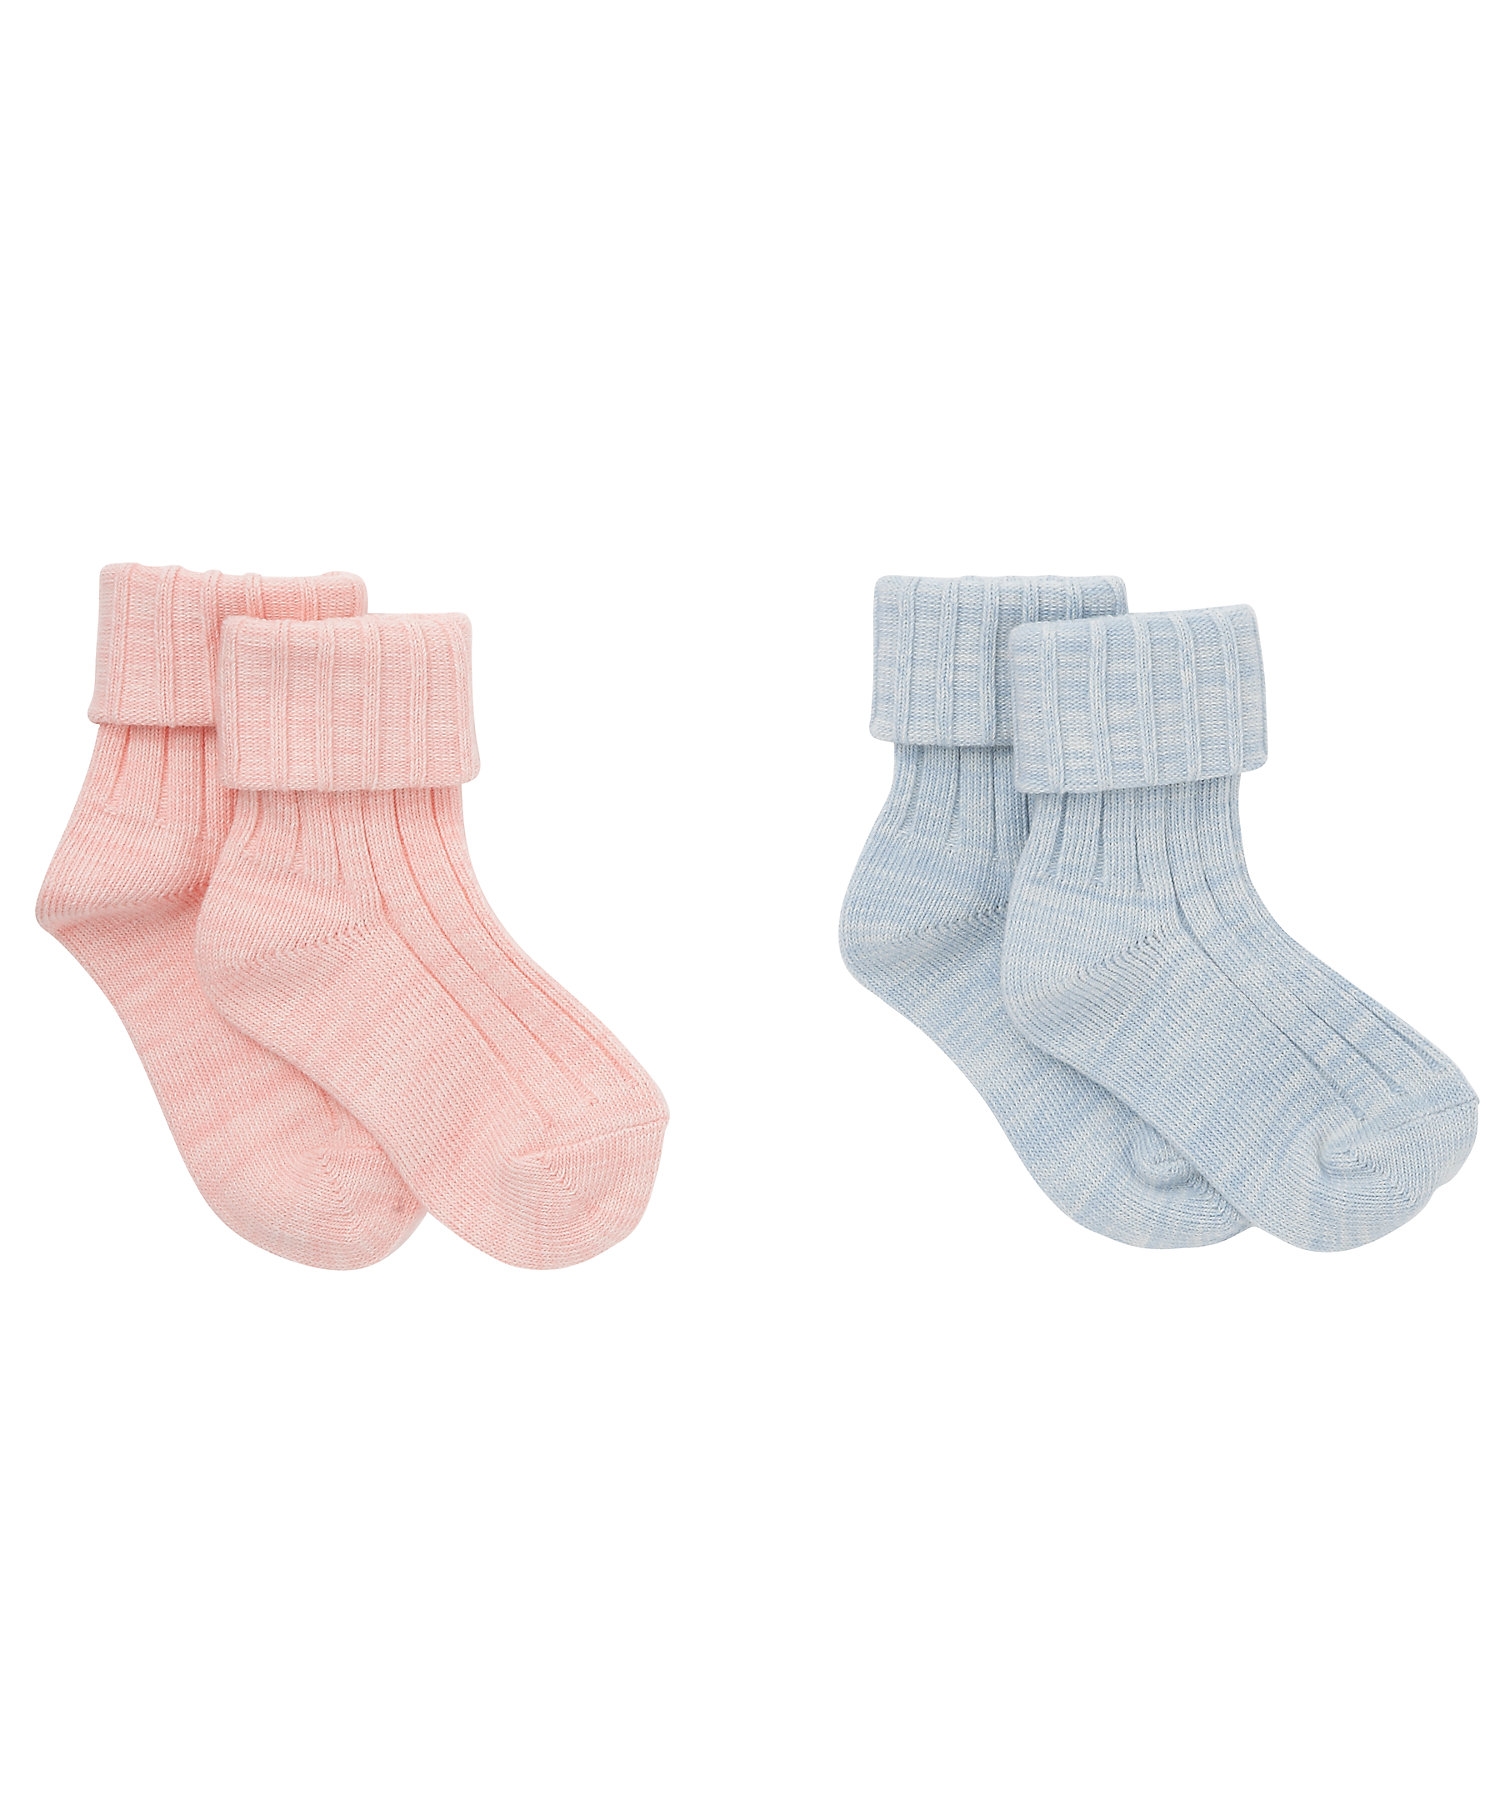 Mothercare | Girls Ribbed Socks - Pack Of 2 - Multicolor 0